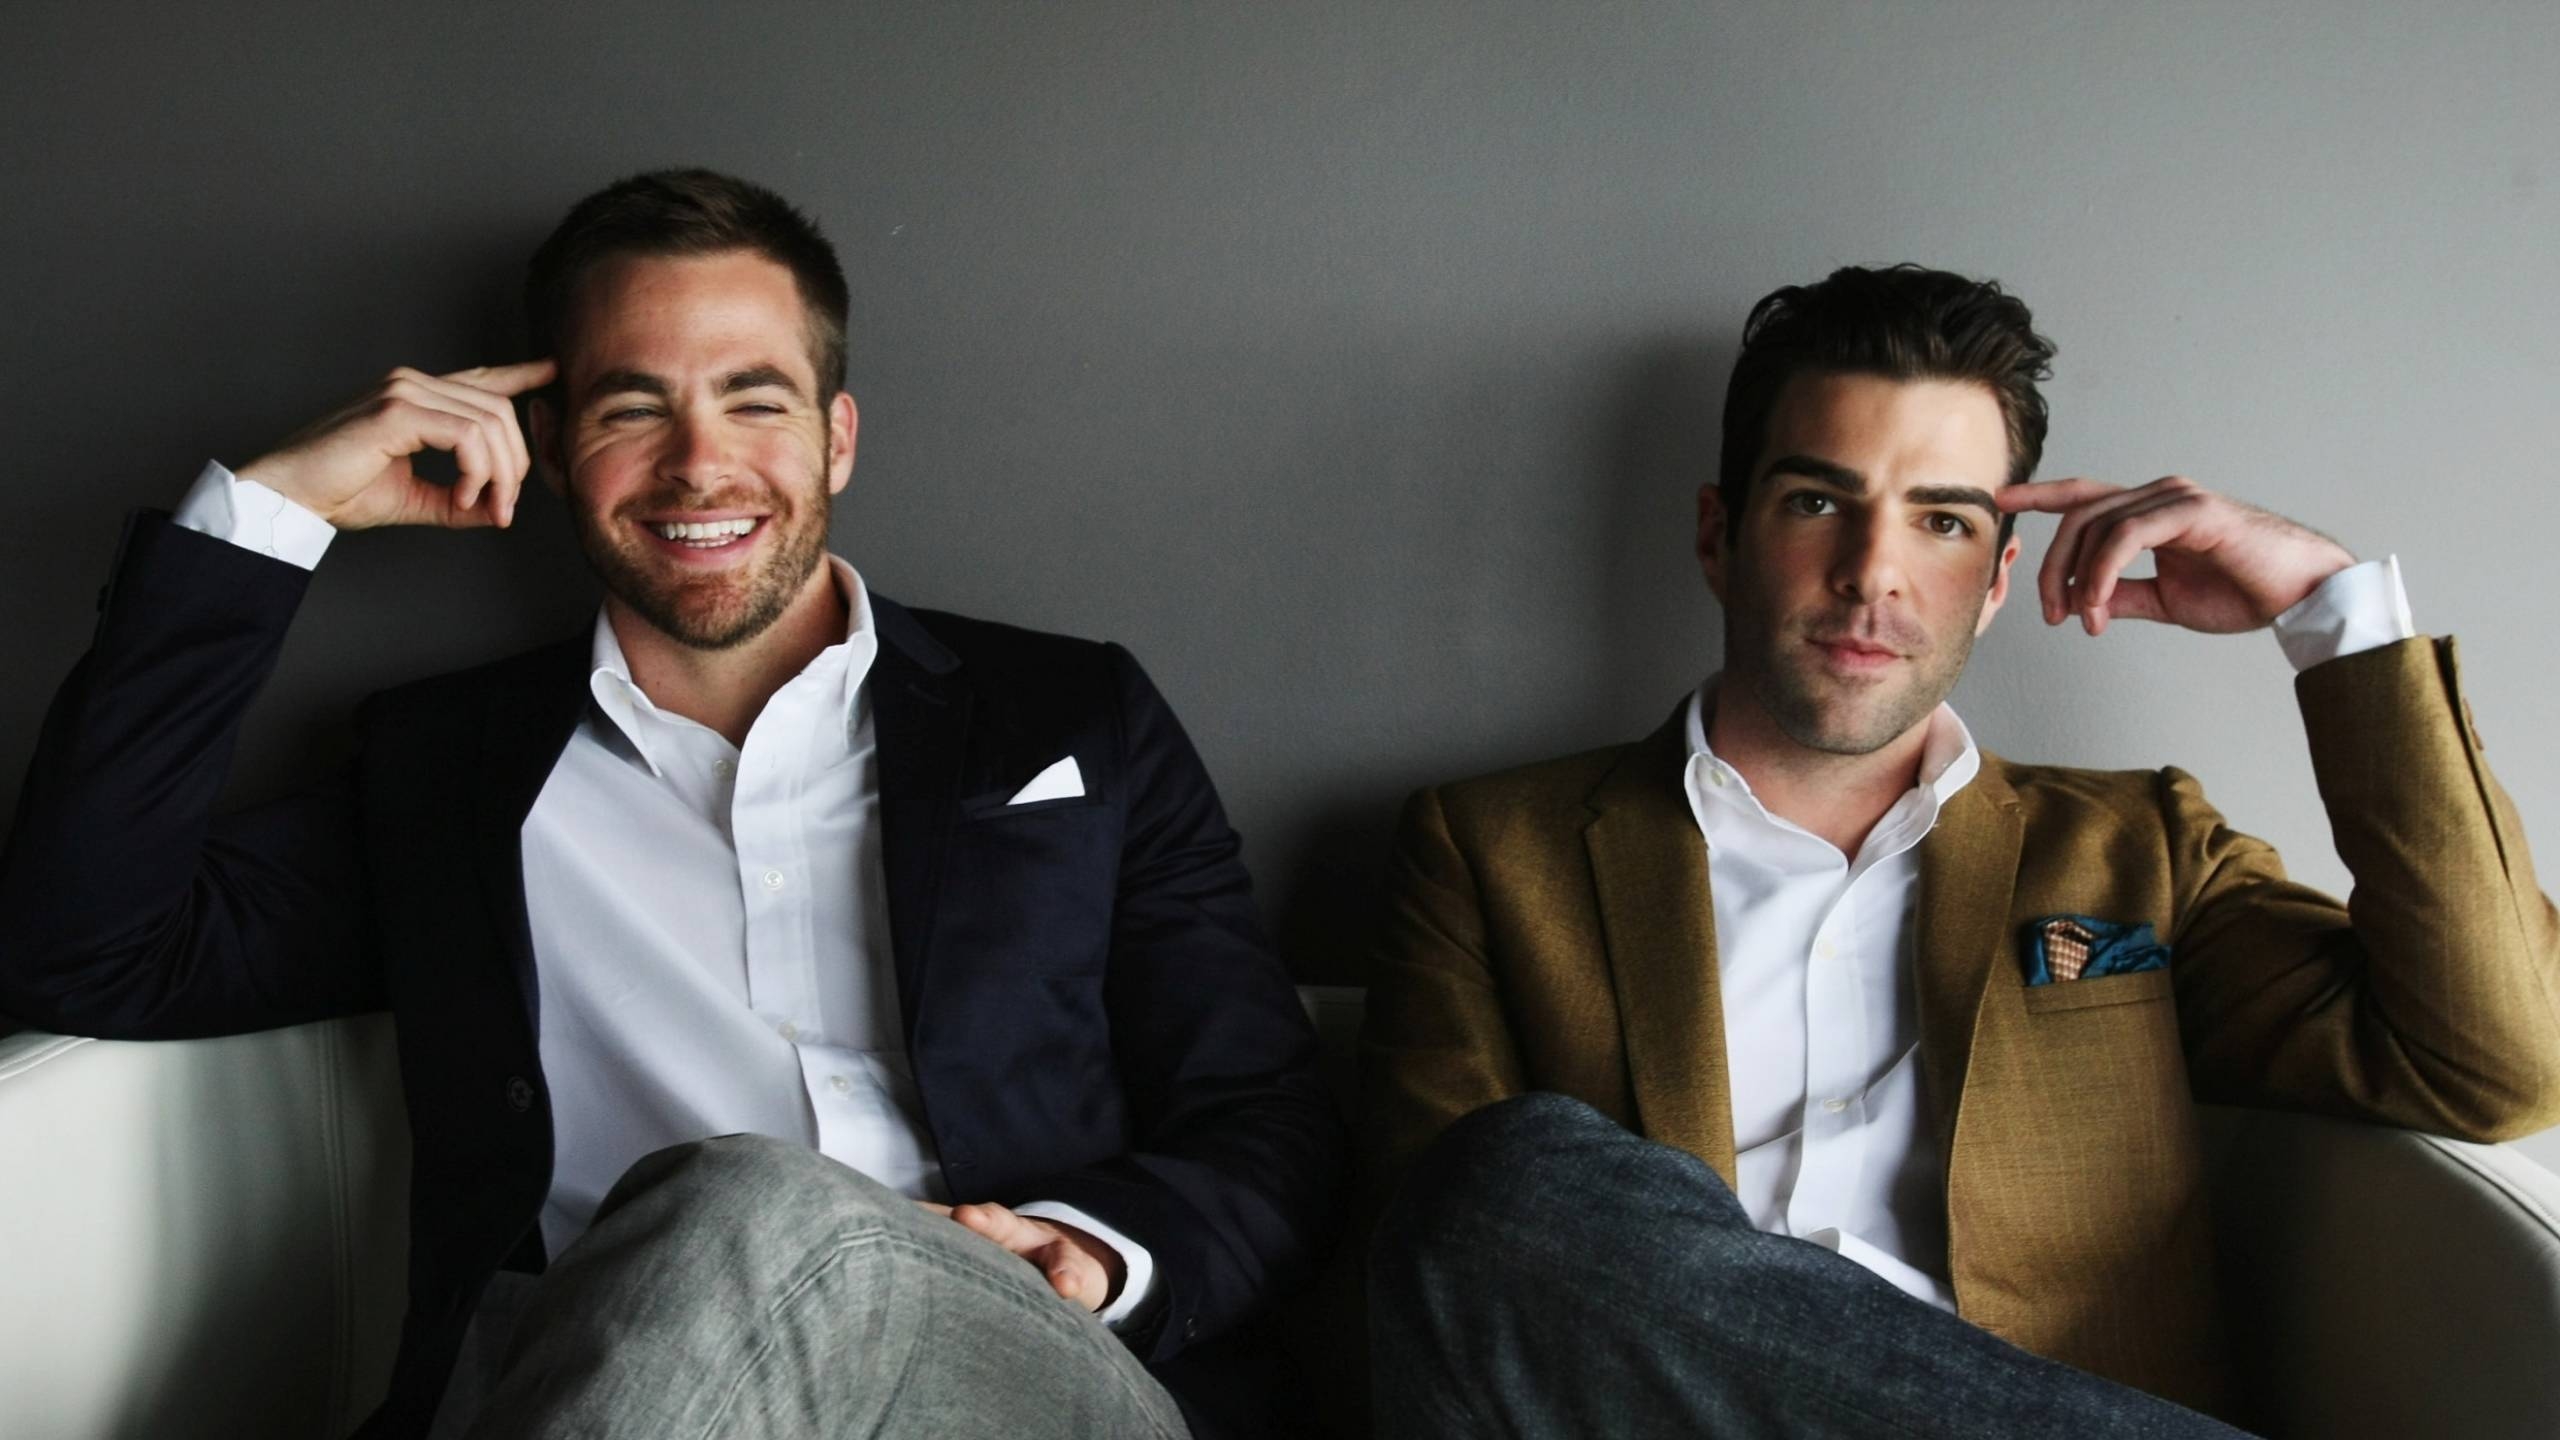 Chris Pine and Zachary Quinto for 2560x1440 HDTV resolution